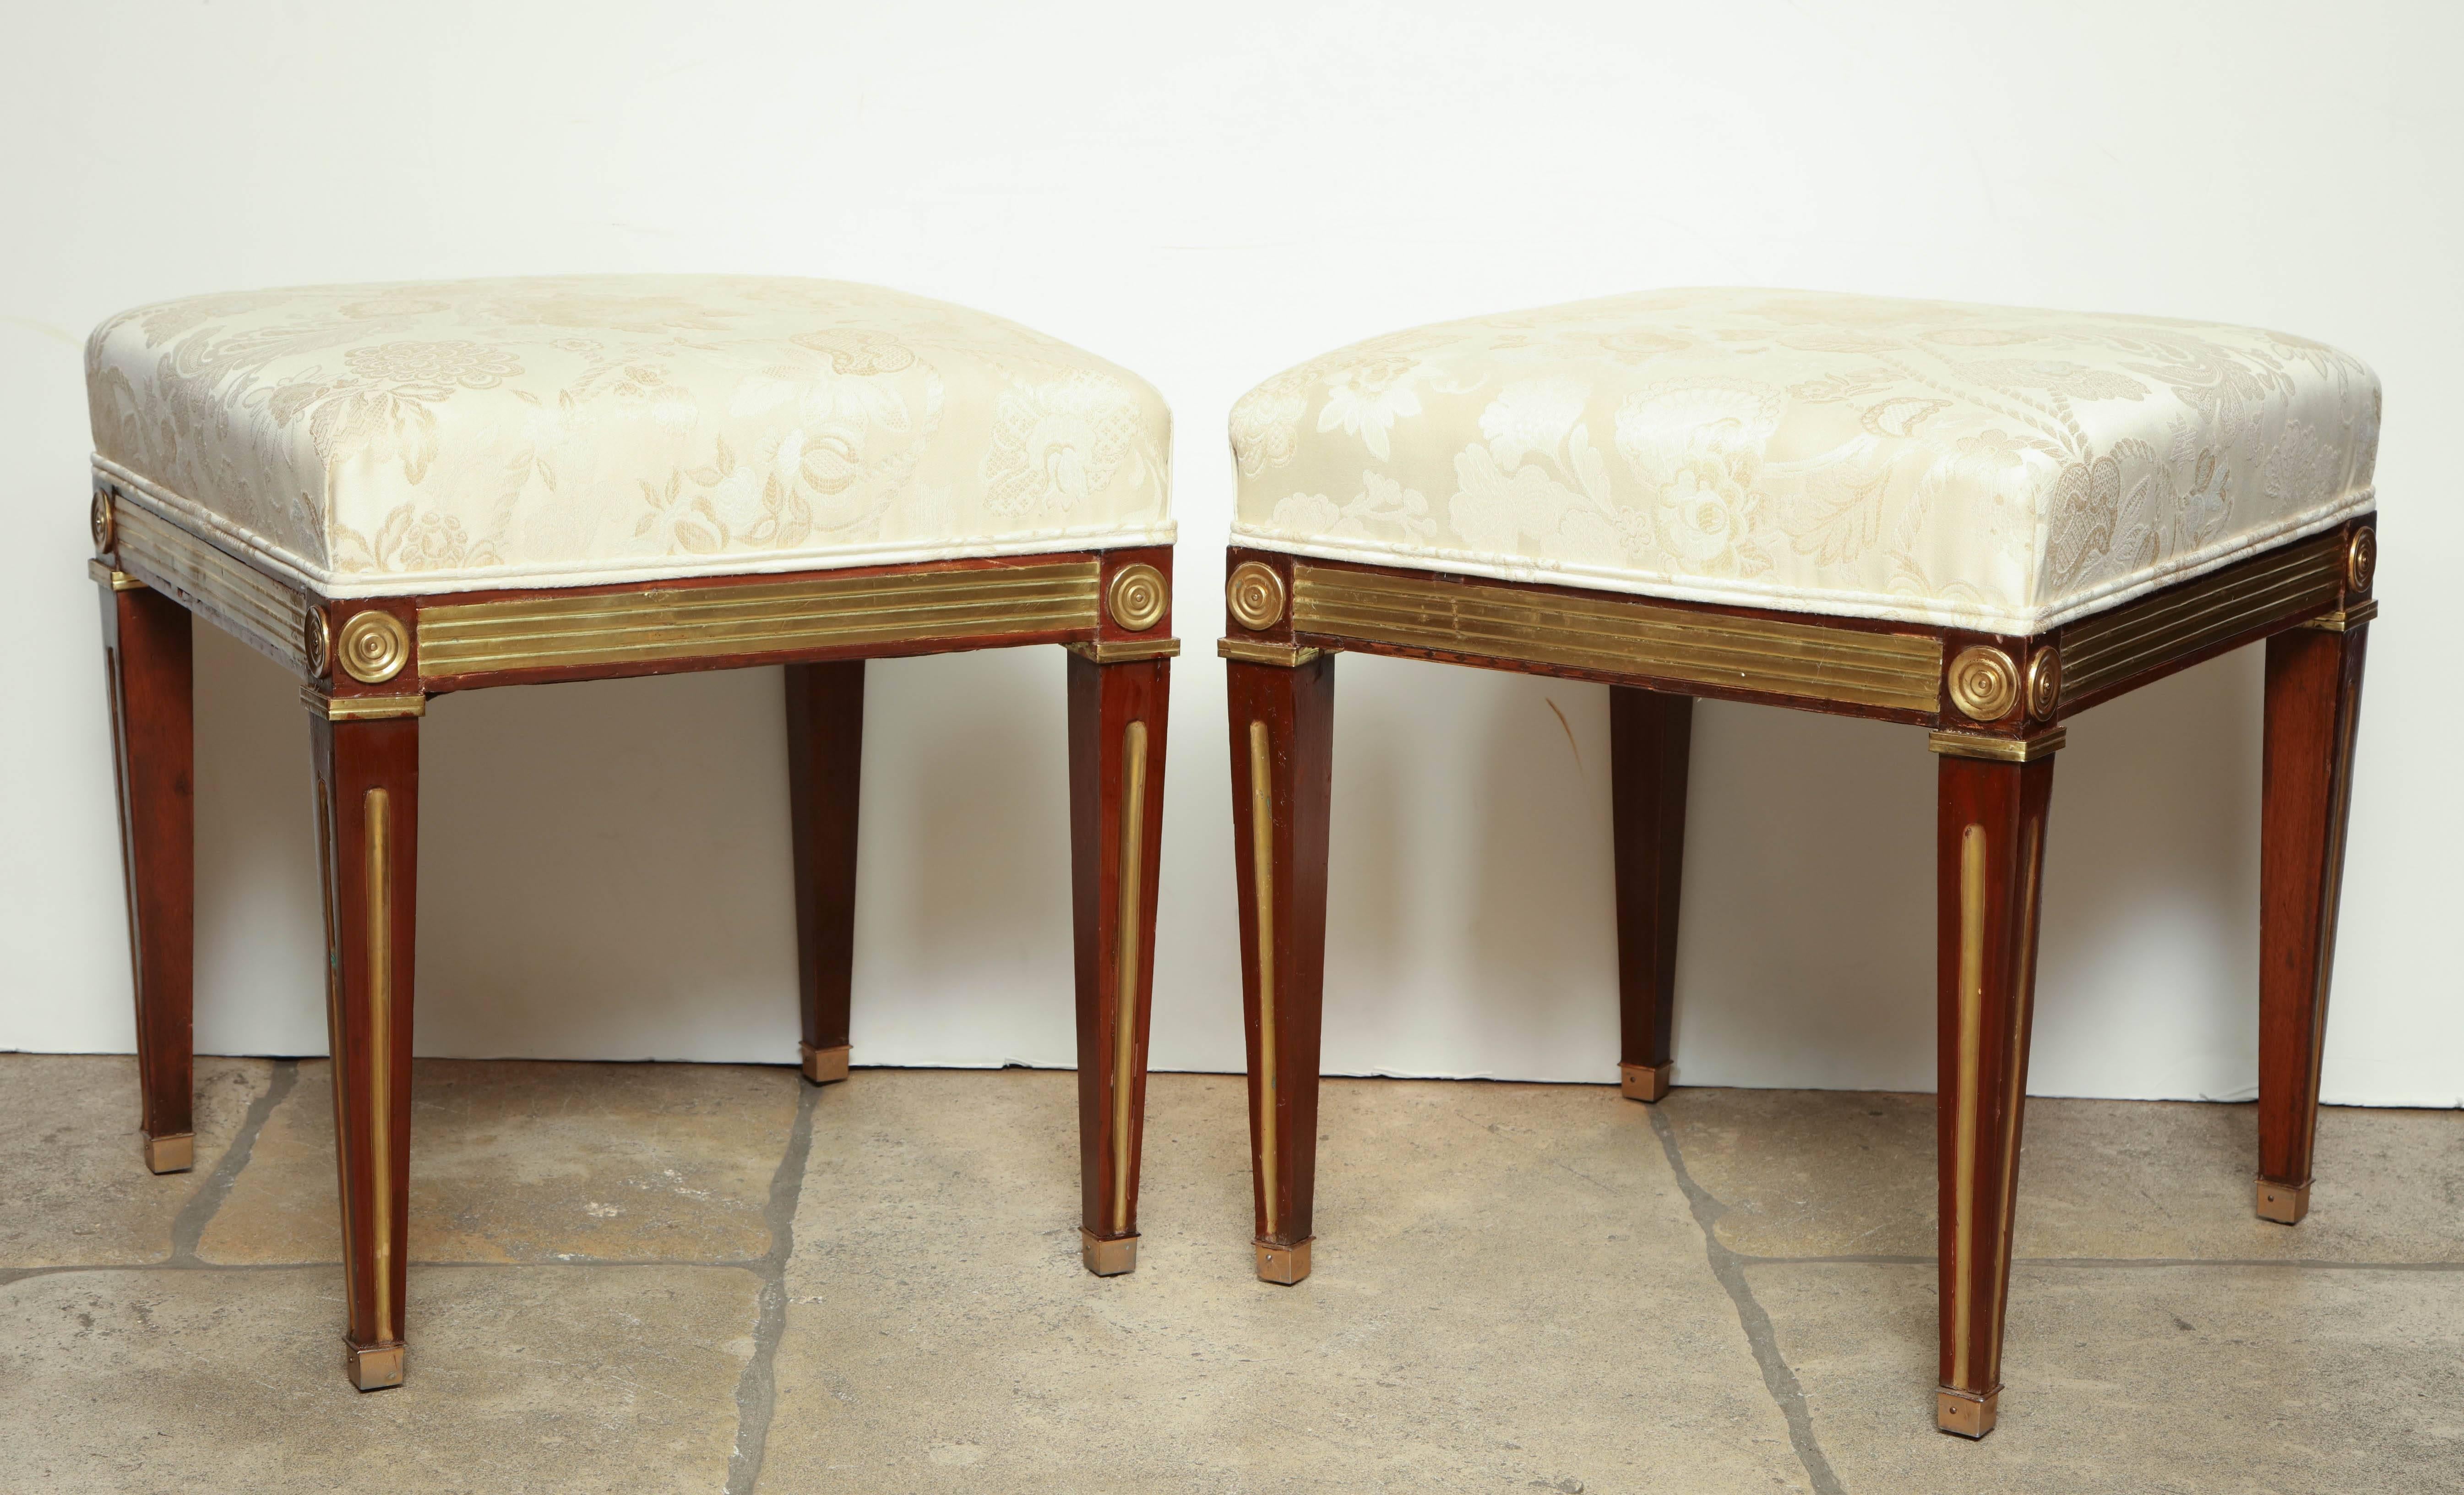 A pair of Russian Neoclassic stools with giltwood accents.